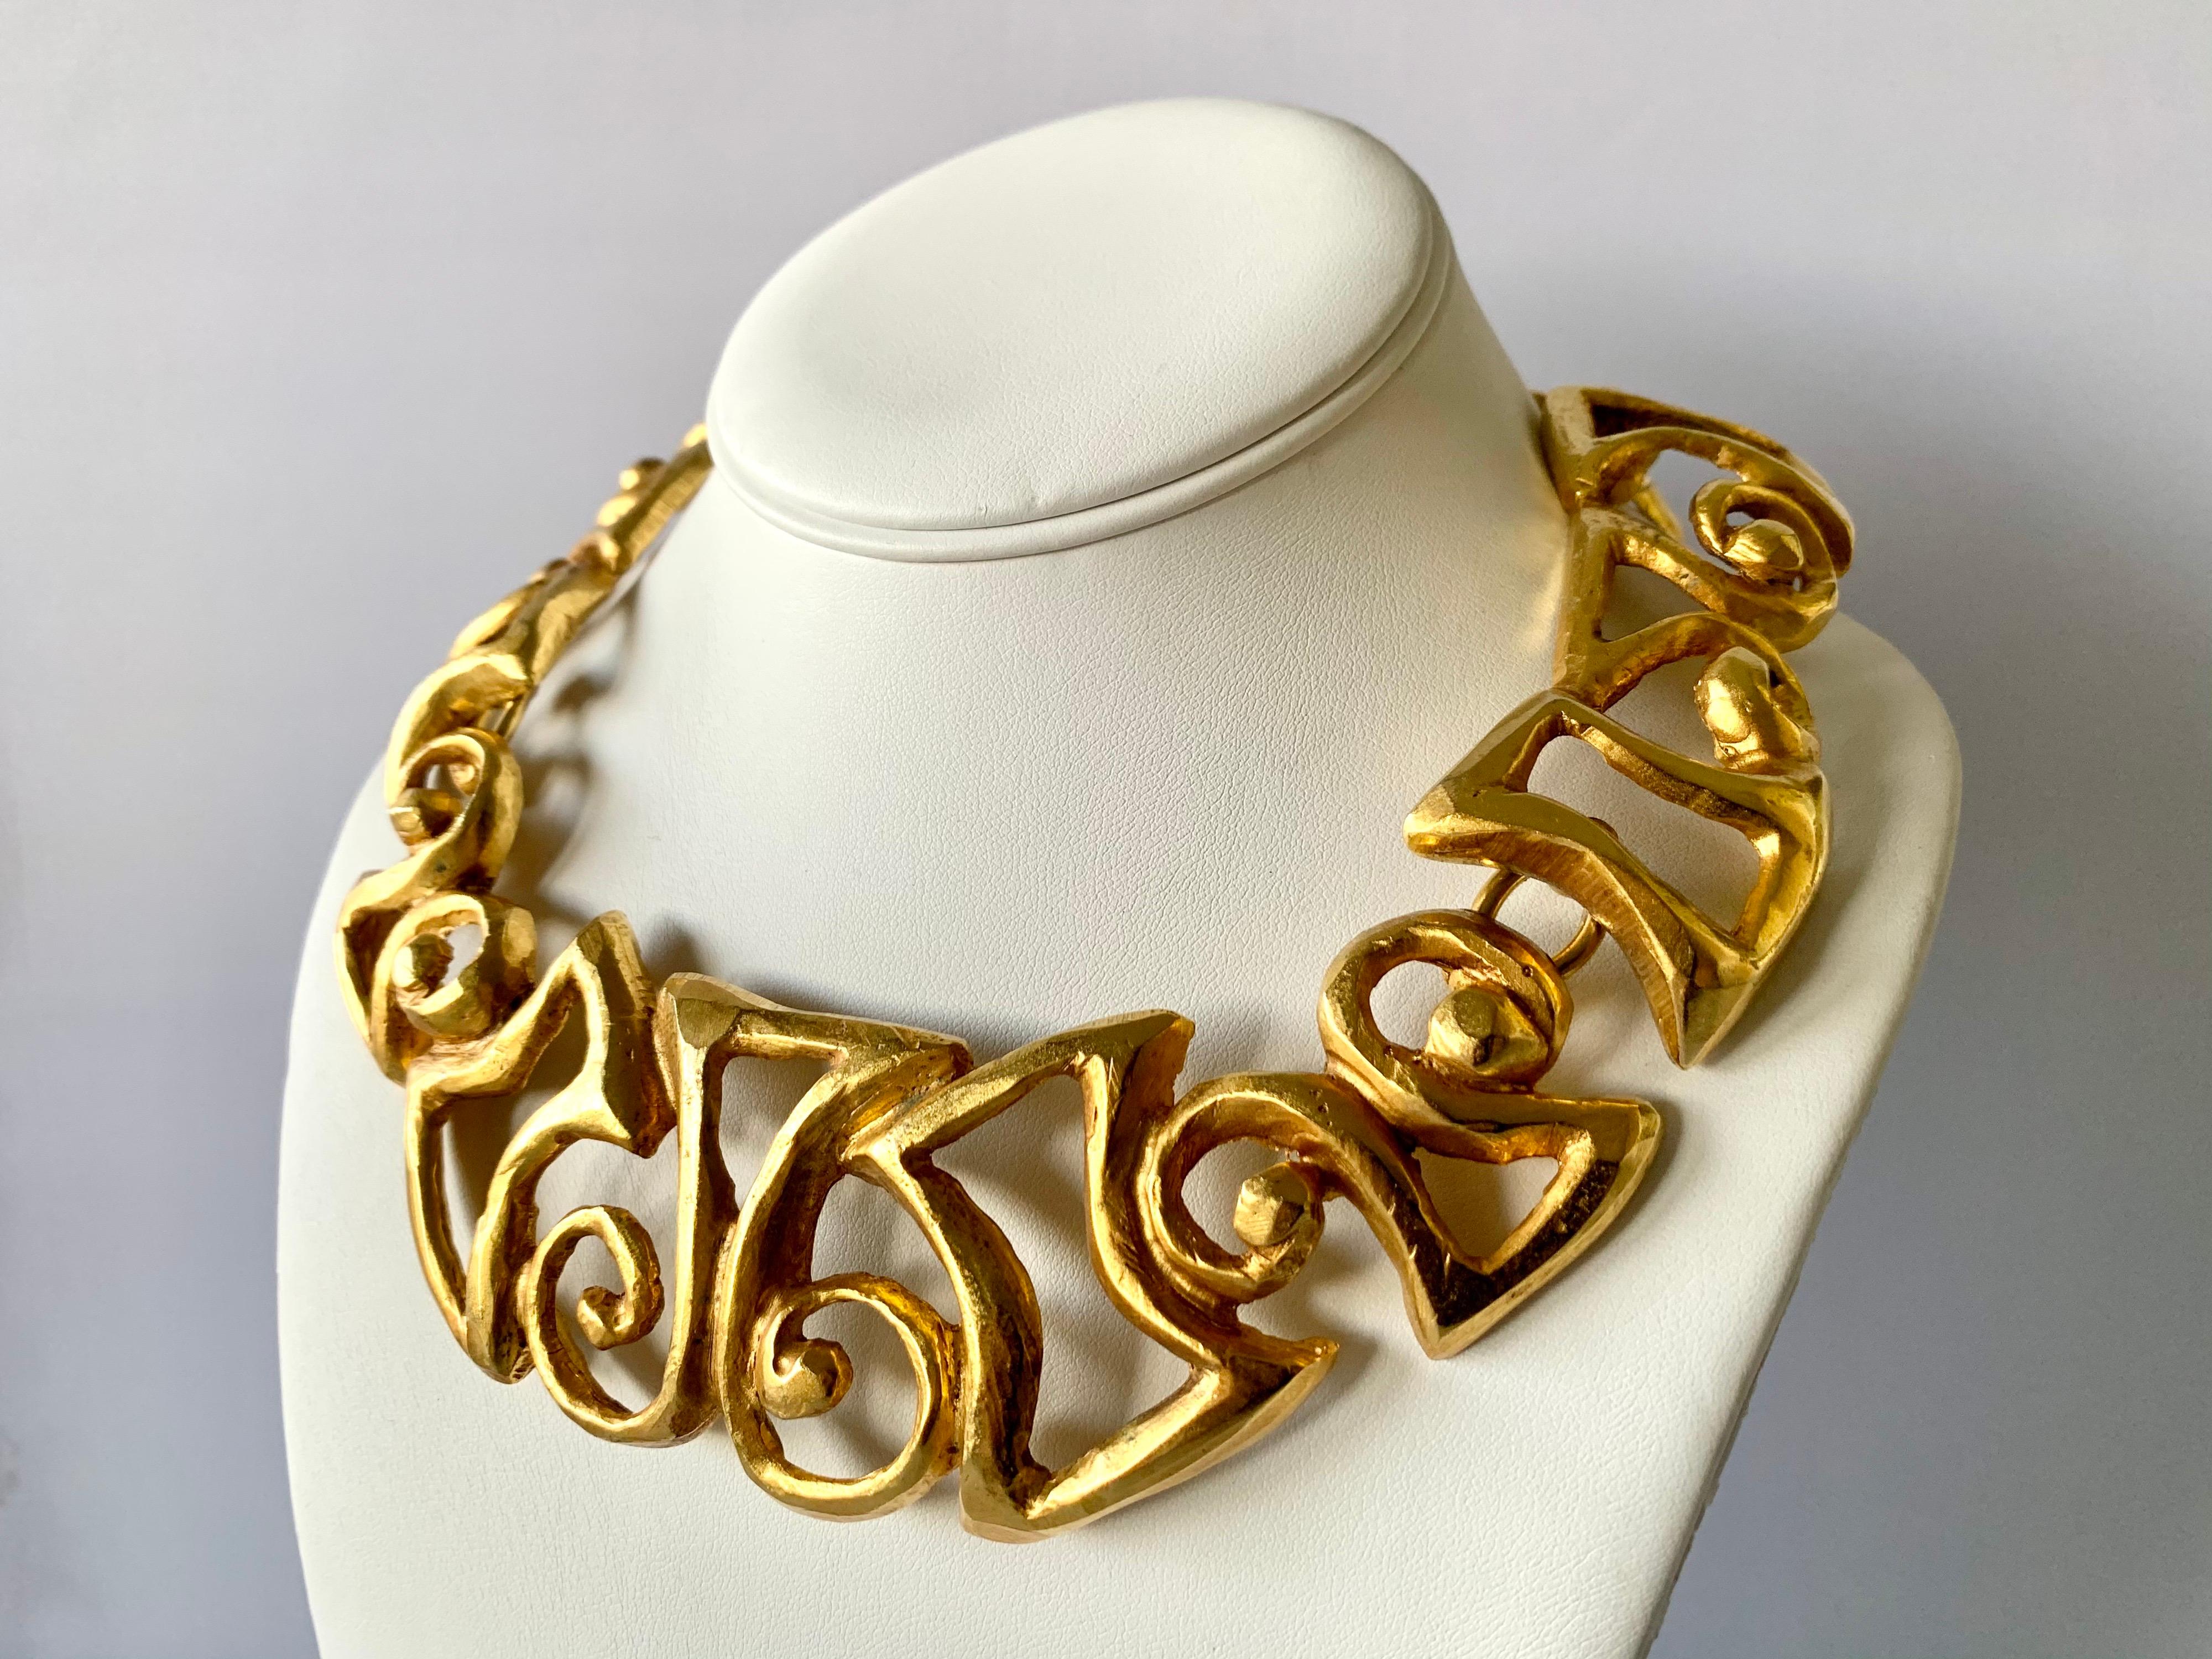 Vintage Christian Lacroix articulated gold-tone chunky statement necklace featuring a contemporary scroll tribal design - made in Paris circa 1990s.